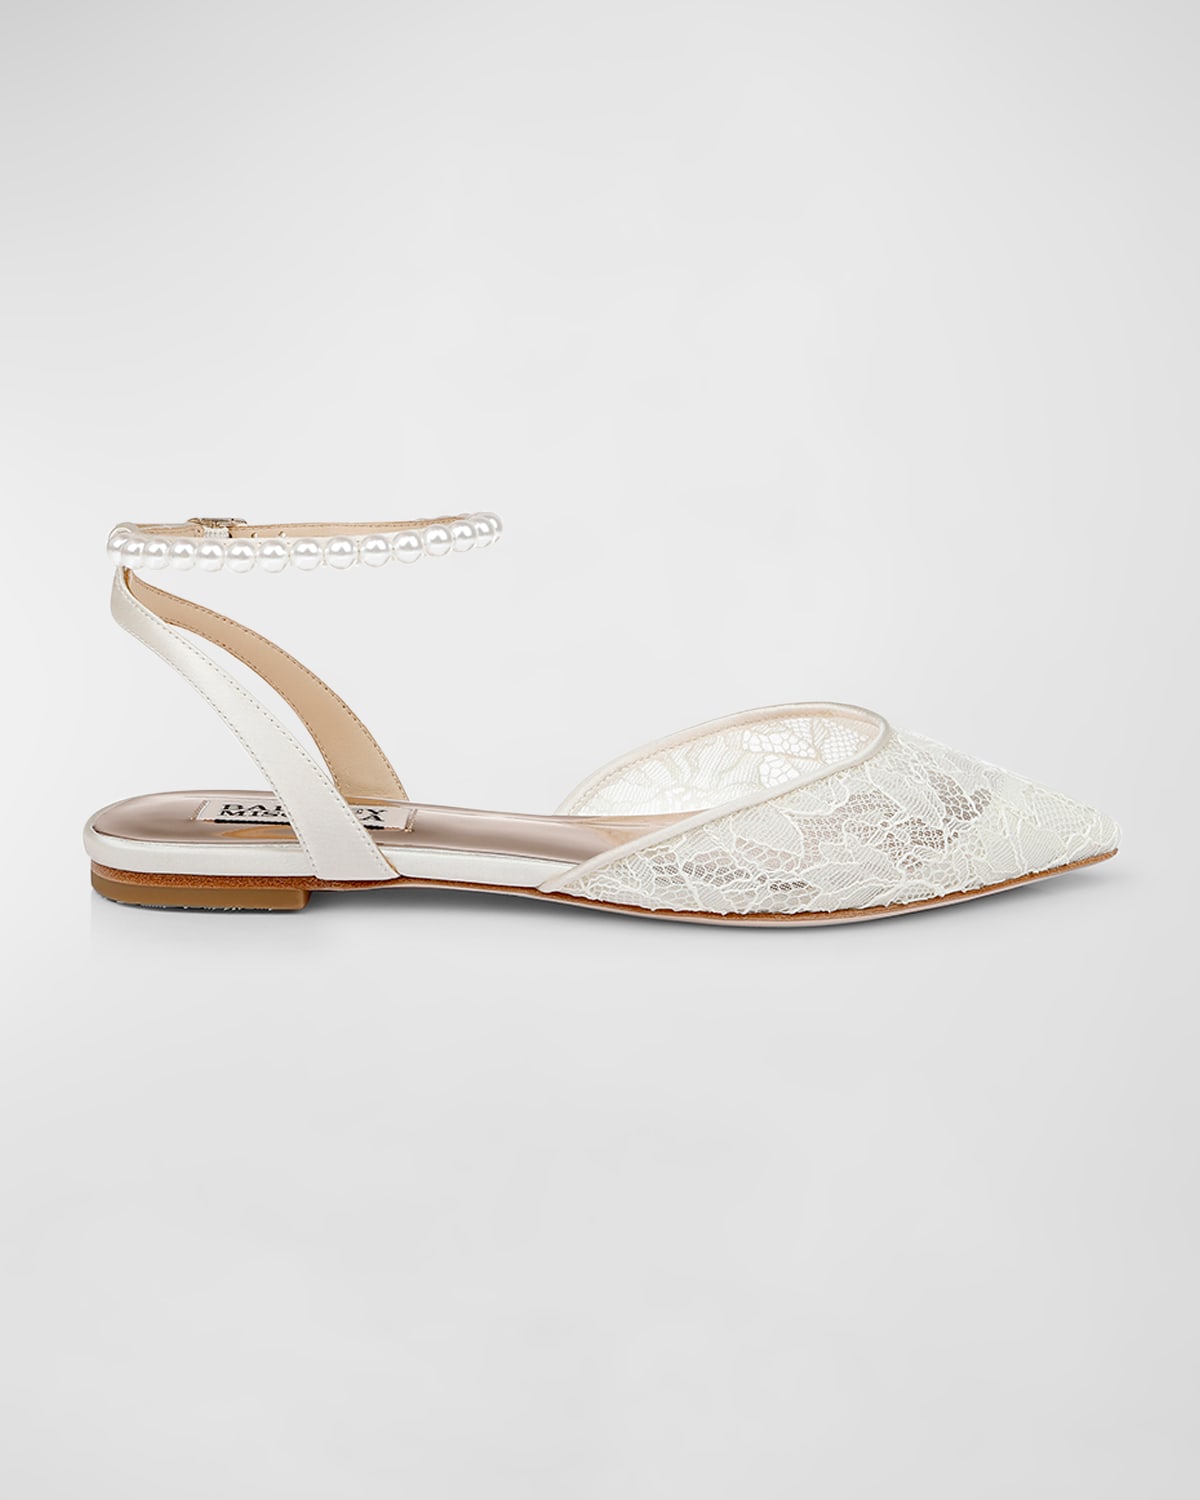 Fawn Mesh Ankle-Strap Ballerina Flats